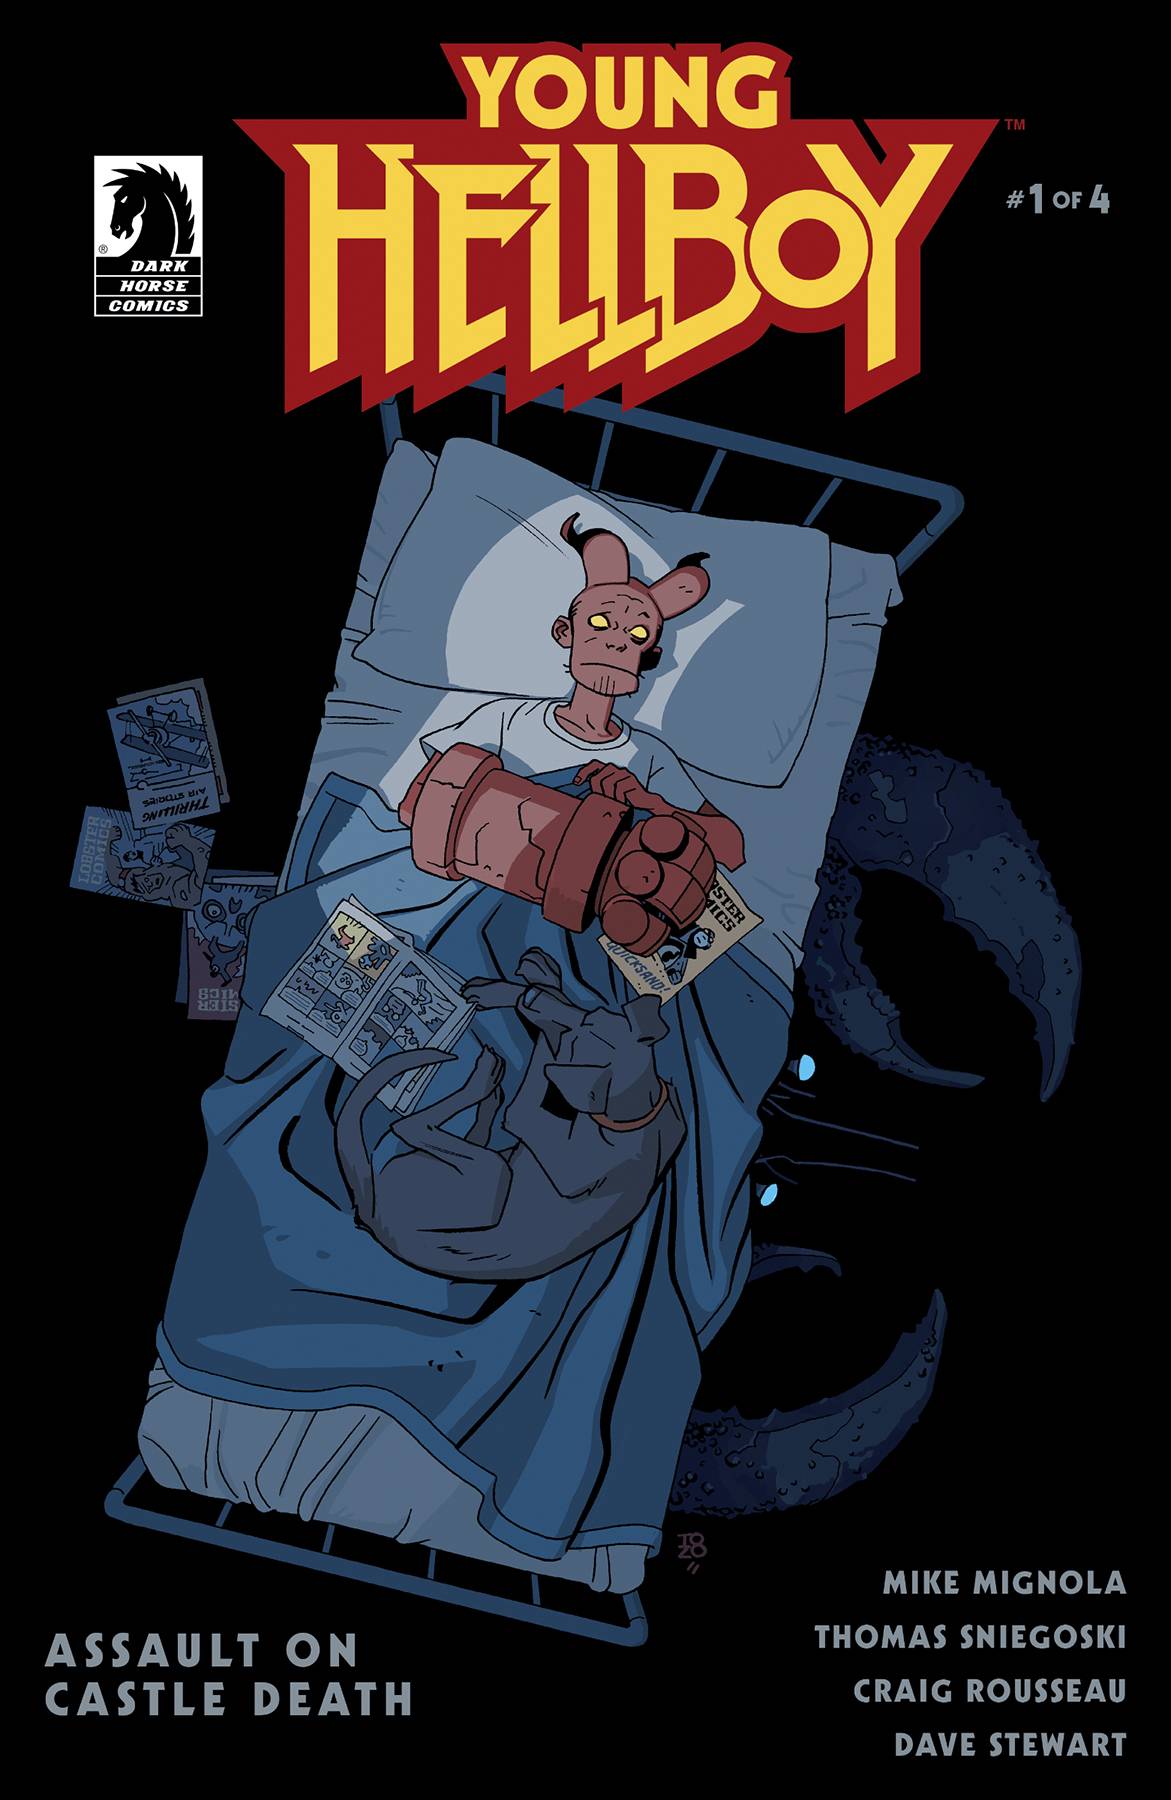 YOUNG HELLBOY ASSAULT ON CASTLE DEATH #1 (OF 4) CVR B ZONJIC - Third Eye